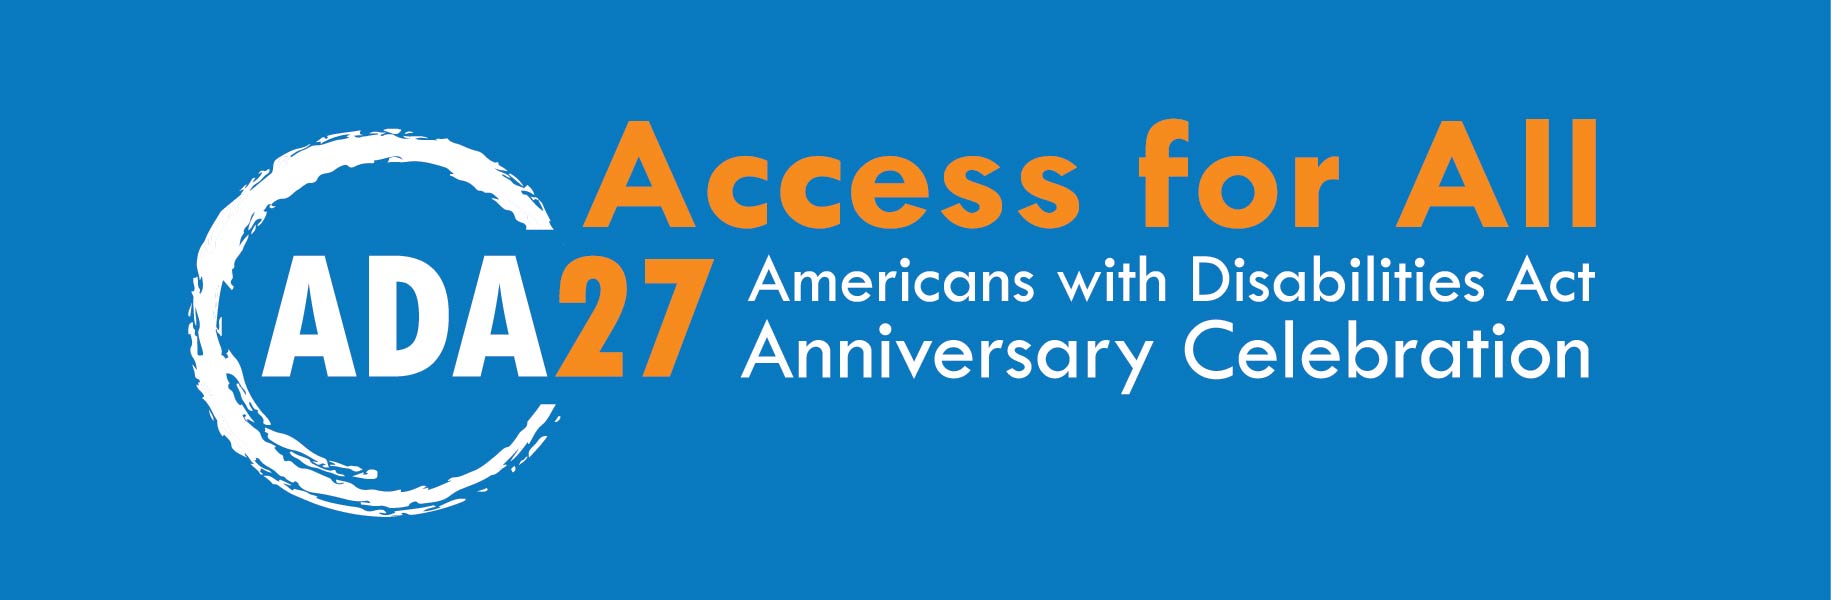 ADA27 / Access for All